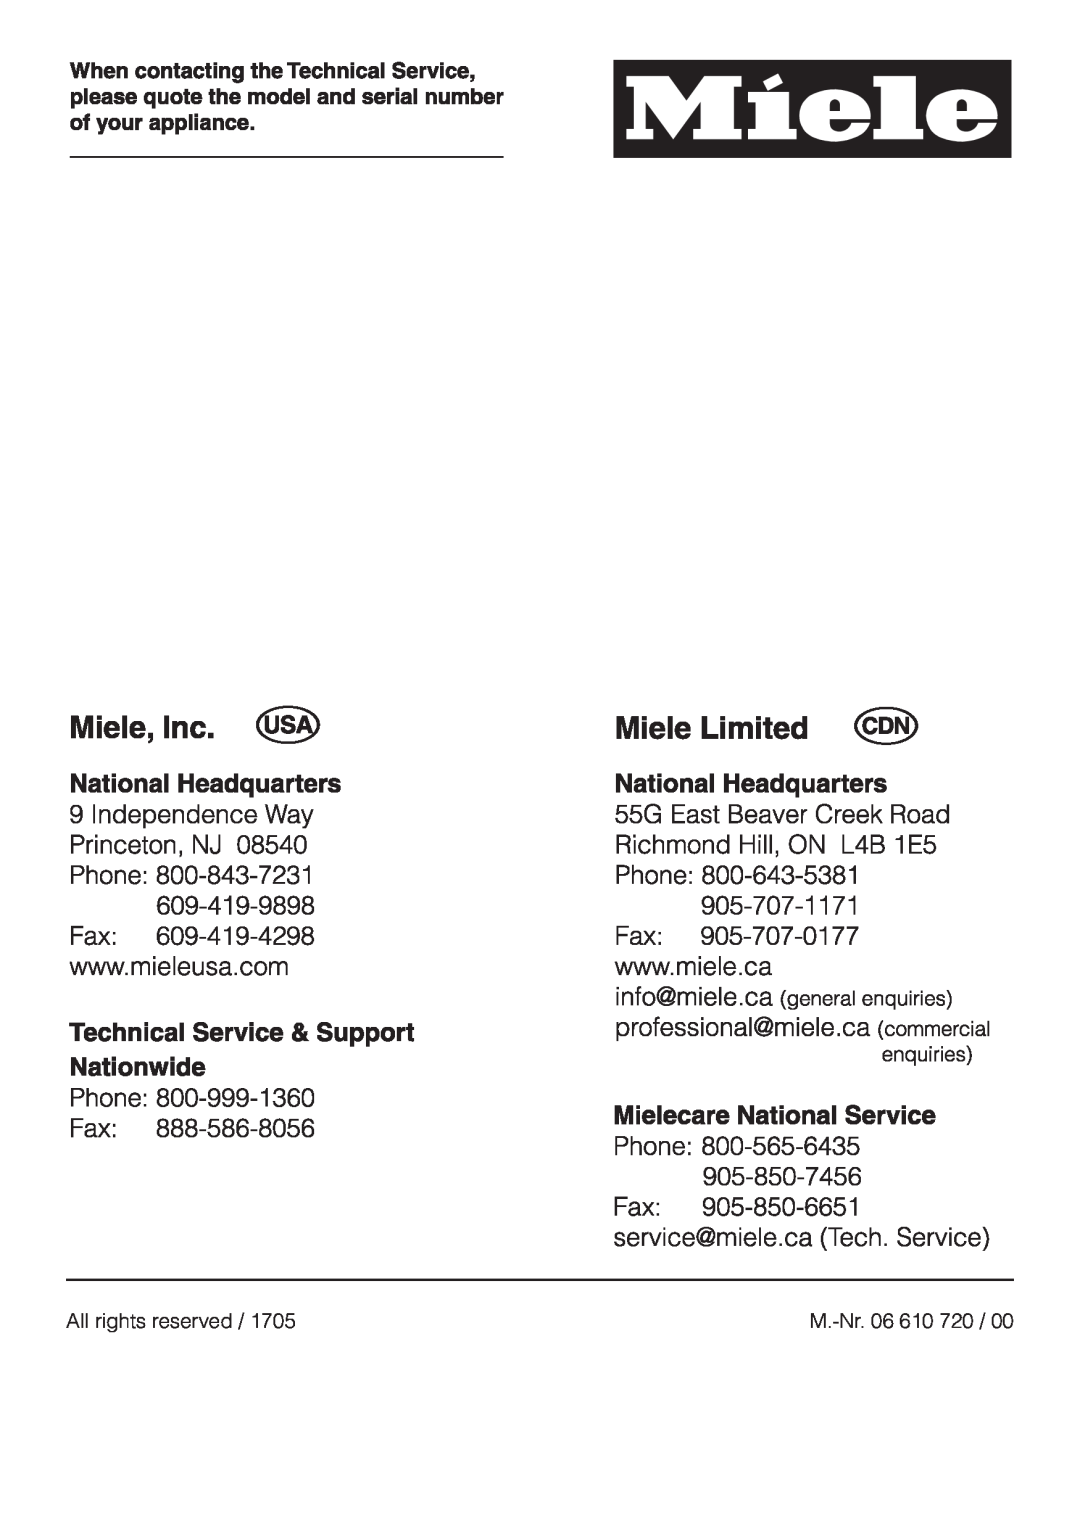 Miele T 1413 T 1415 operating instructions All rights reserved, M.-Nr. 06 610 720 